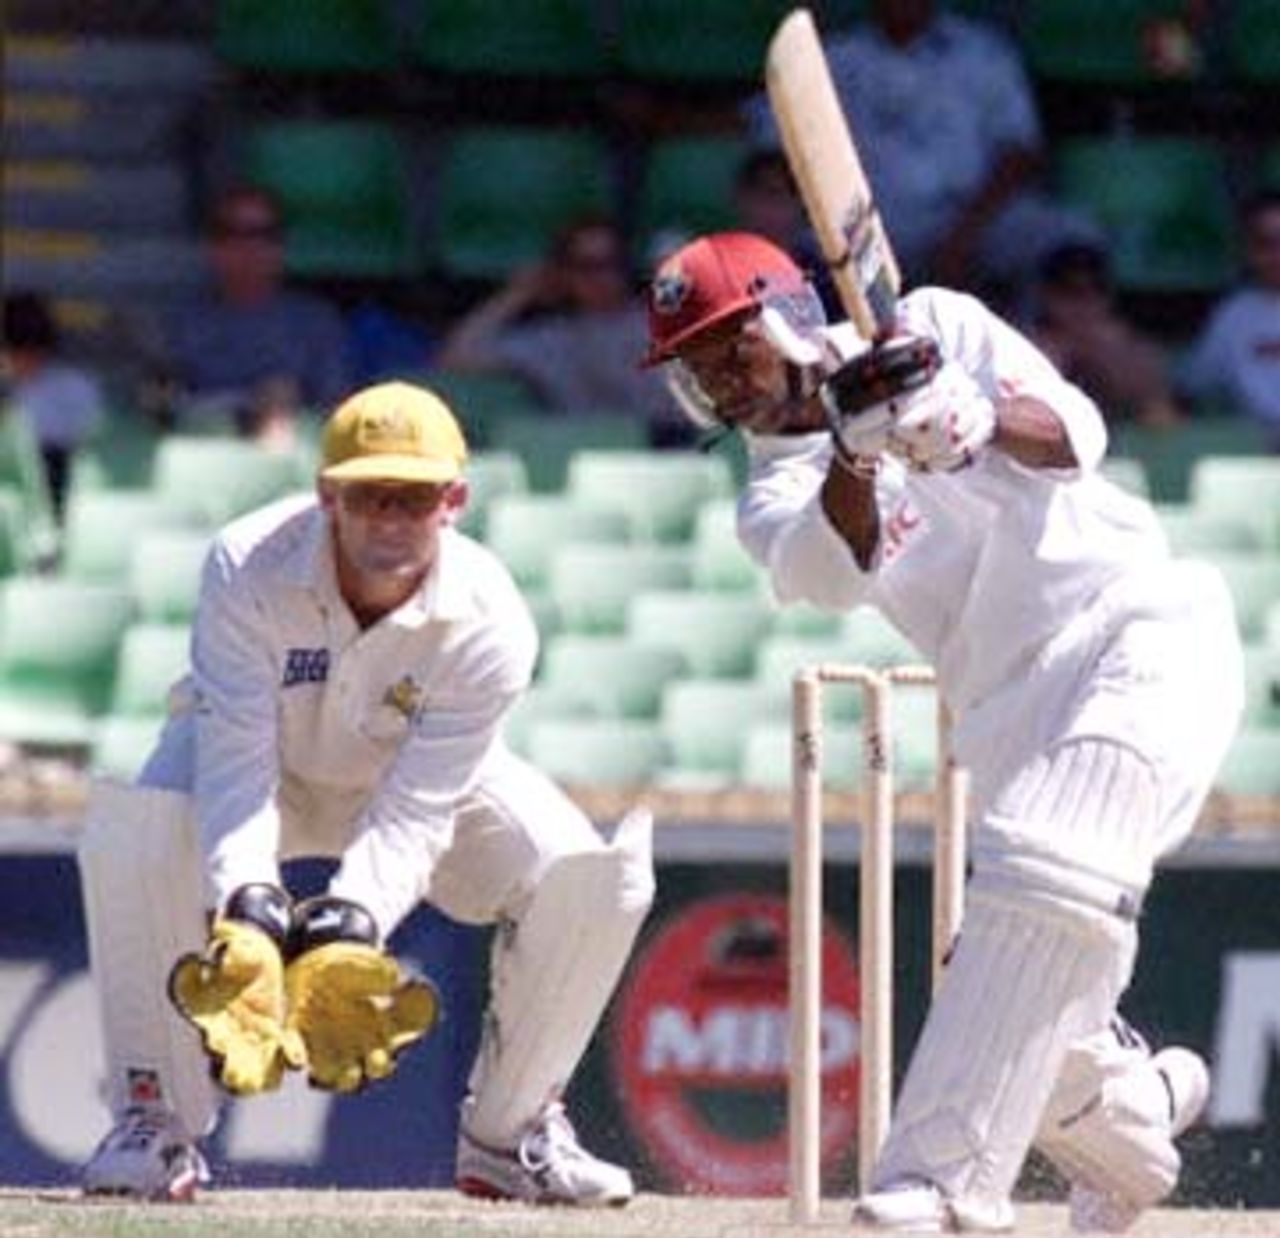 West Indies batsman and vice-captain Sherwin Campbell (R) plays a drive, watched by wicketkeeper Adam Gilchrist (L) during a four day match against the Western Warriors at the WACA ground in Perth 11 November 2000. Campbell is currently 82 not out, with the West Indies 4-181 at tea.